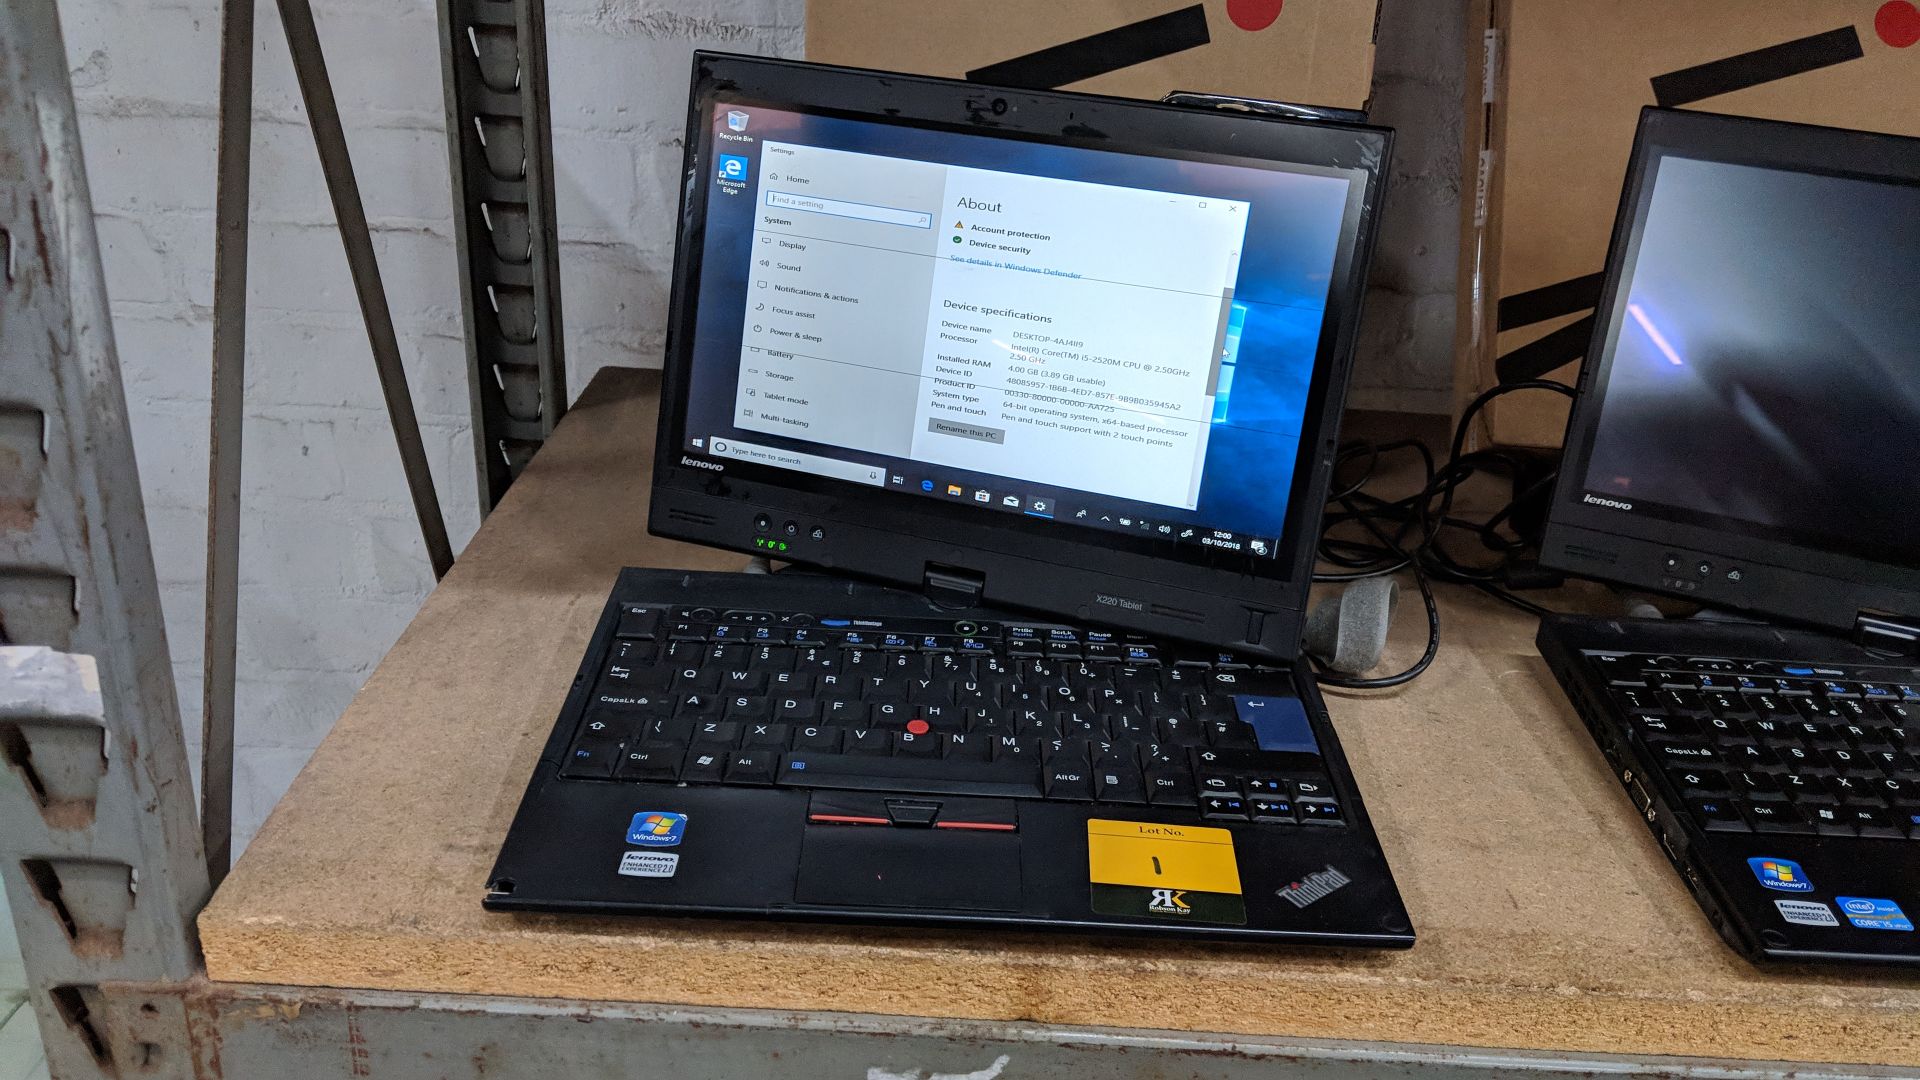 Lenovo ThinkPad X220 tablet/notebook computer with swivel screen including built-in webcam. Model - Image 9 of 12